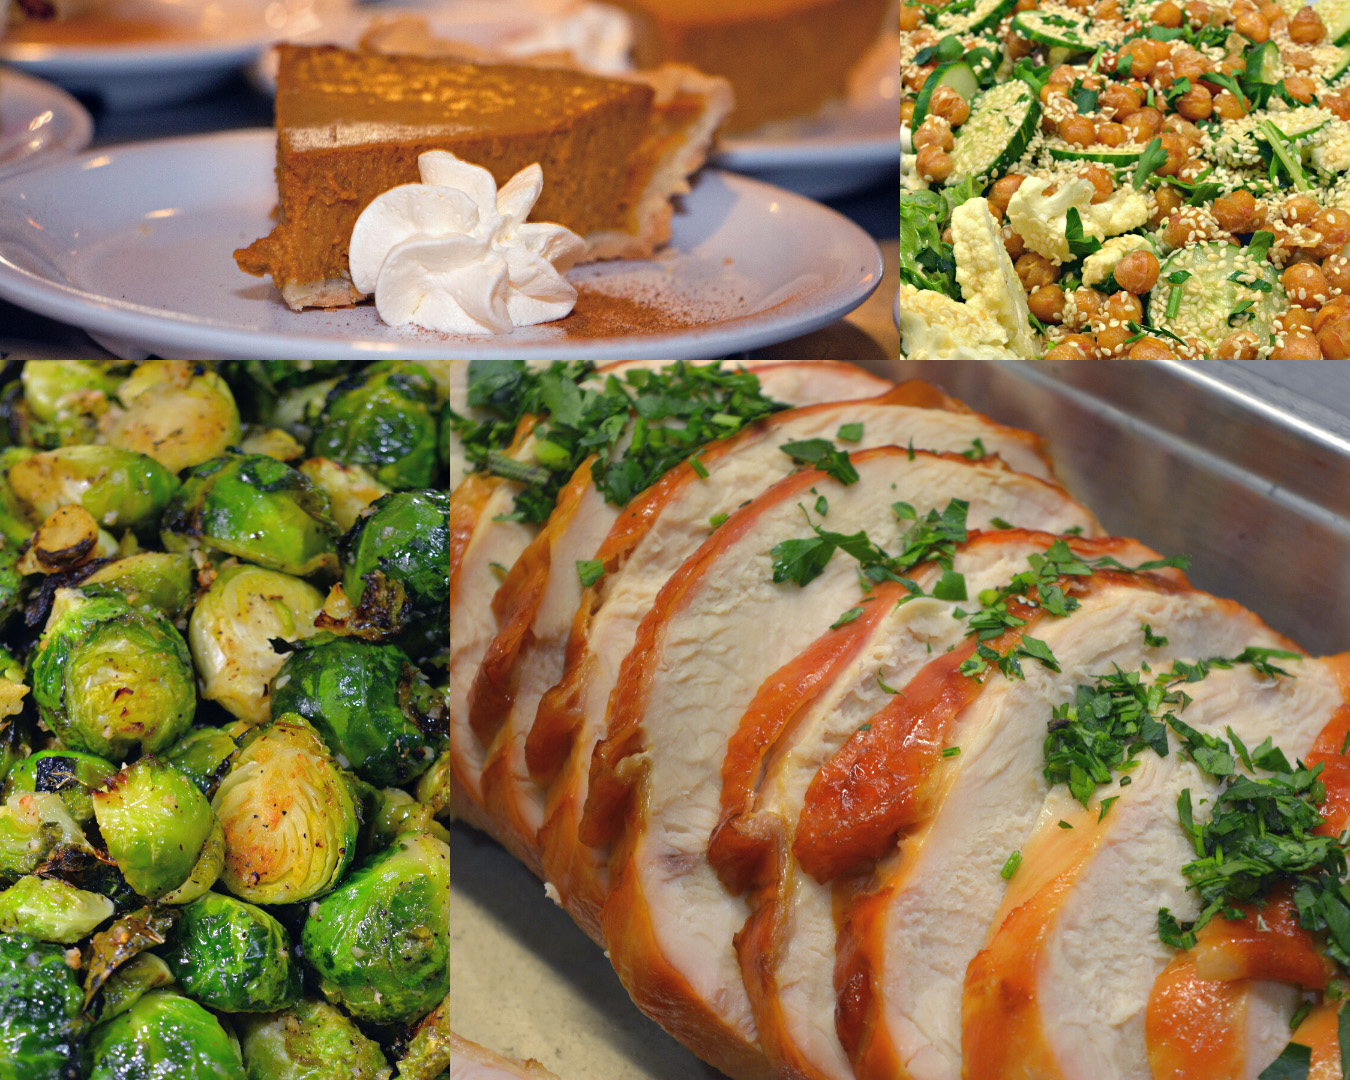 a collage of four images: a piece of pumpkin pie, a salad mix of cauliflower, greens, and chickpeas, roasted brussels sprouts, and slices of turkey with garnish.